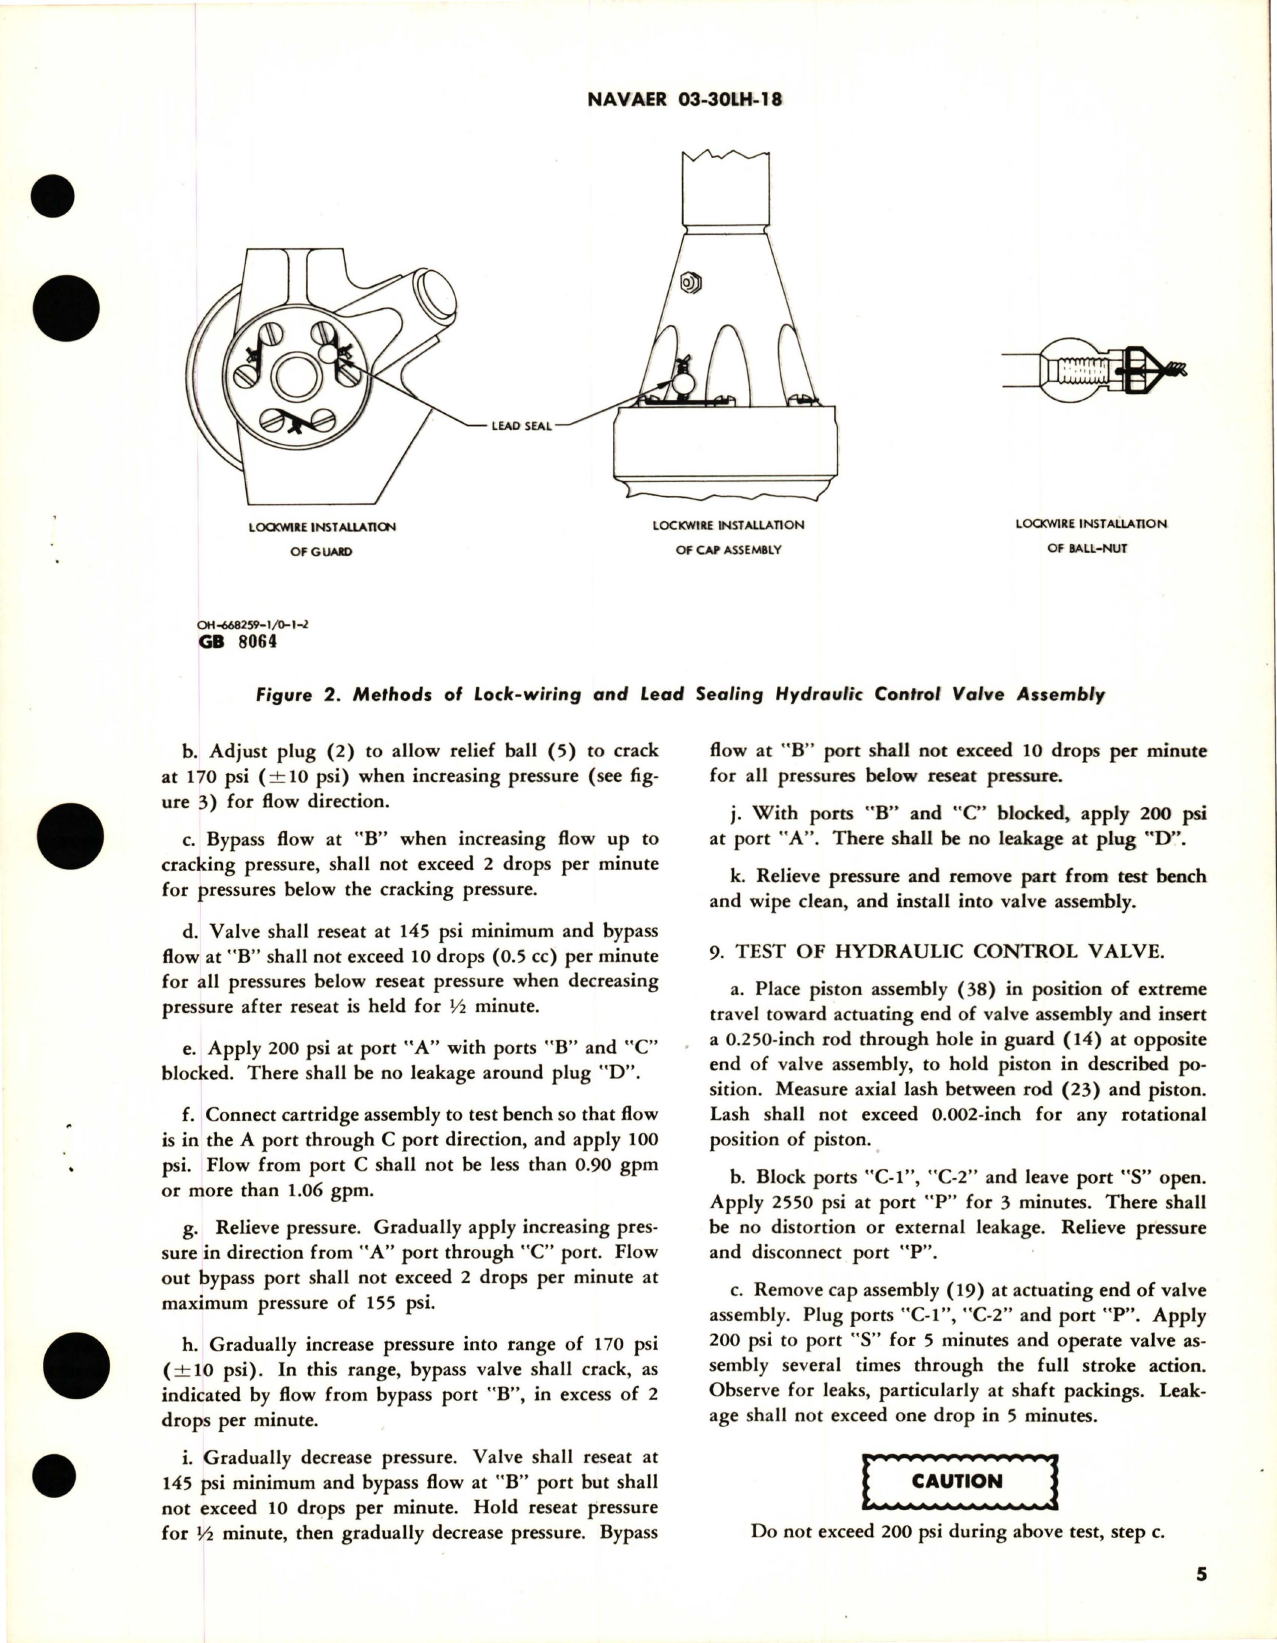 Sample page 5 from AirCorps Library document: Overhaul Instructions with Parts Breakdown for Hydraulic Control Valve - 668259-1